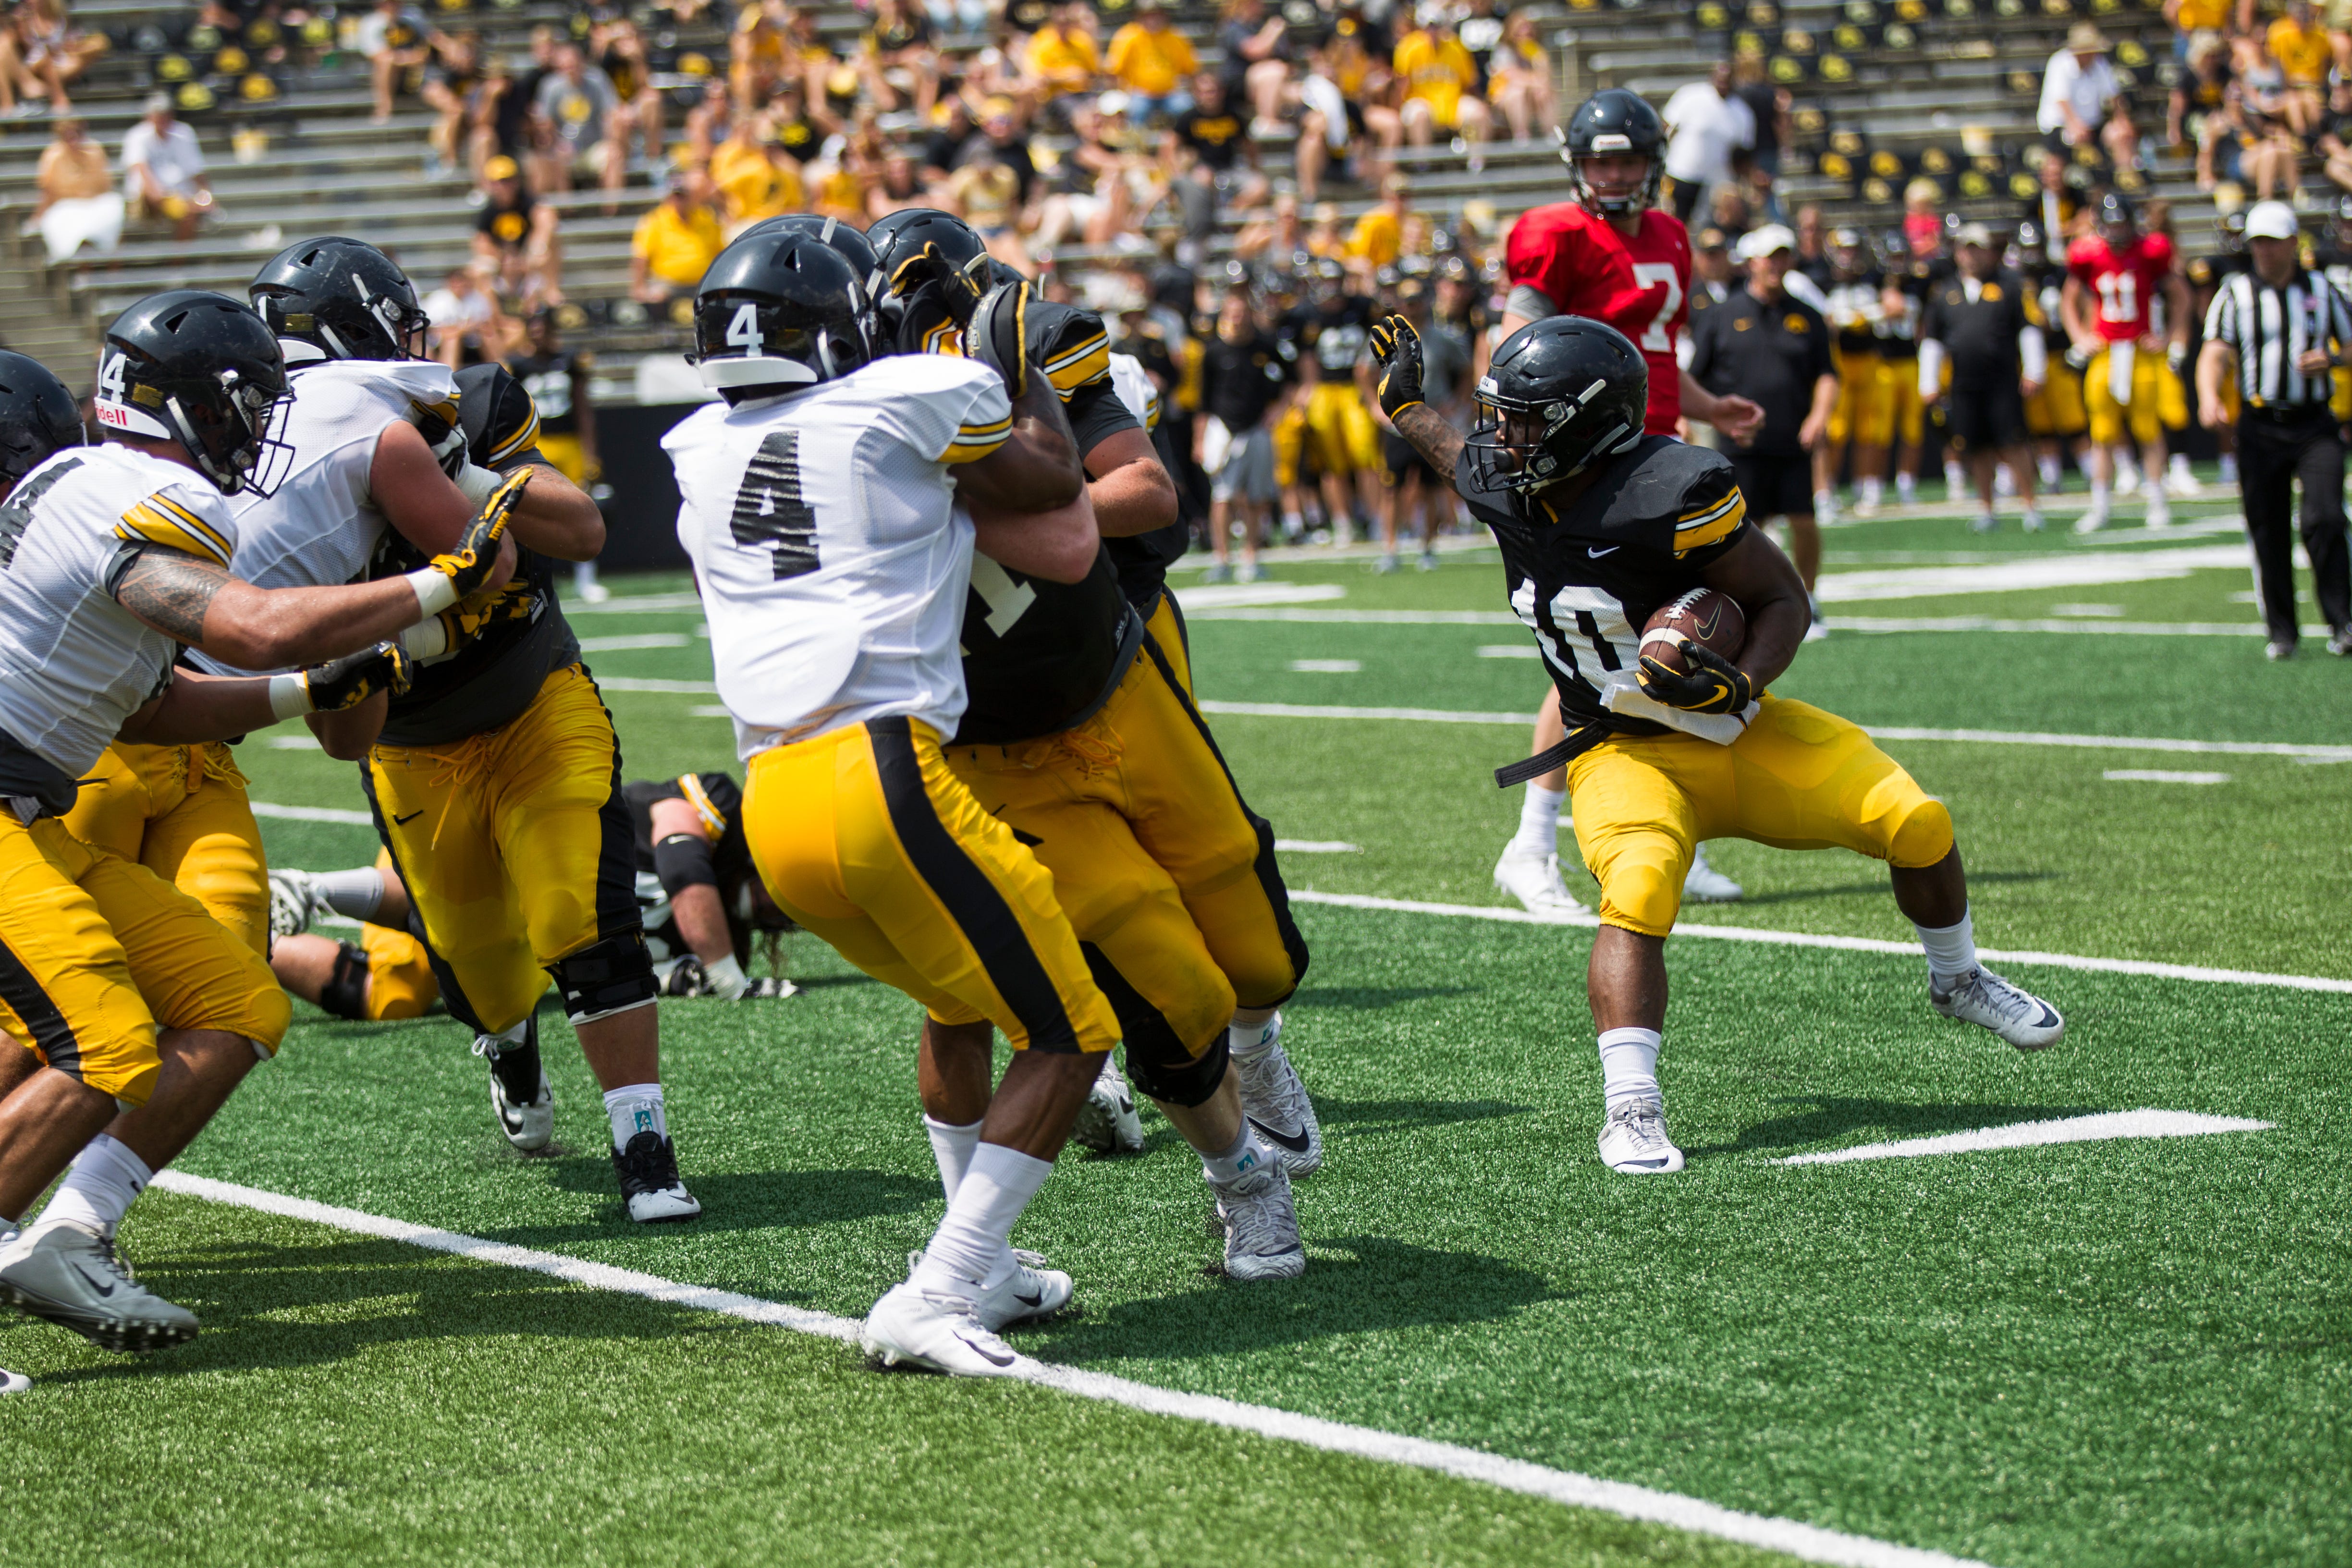 Iowa running back Mekhi Sargent jukes defenders during a Kids Day practice on Saturday, Aug. 11, 2018, at Kinnick Stadium in Iowa City.